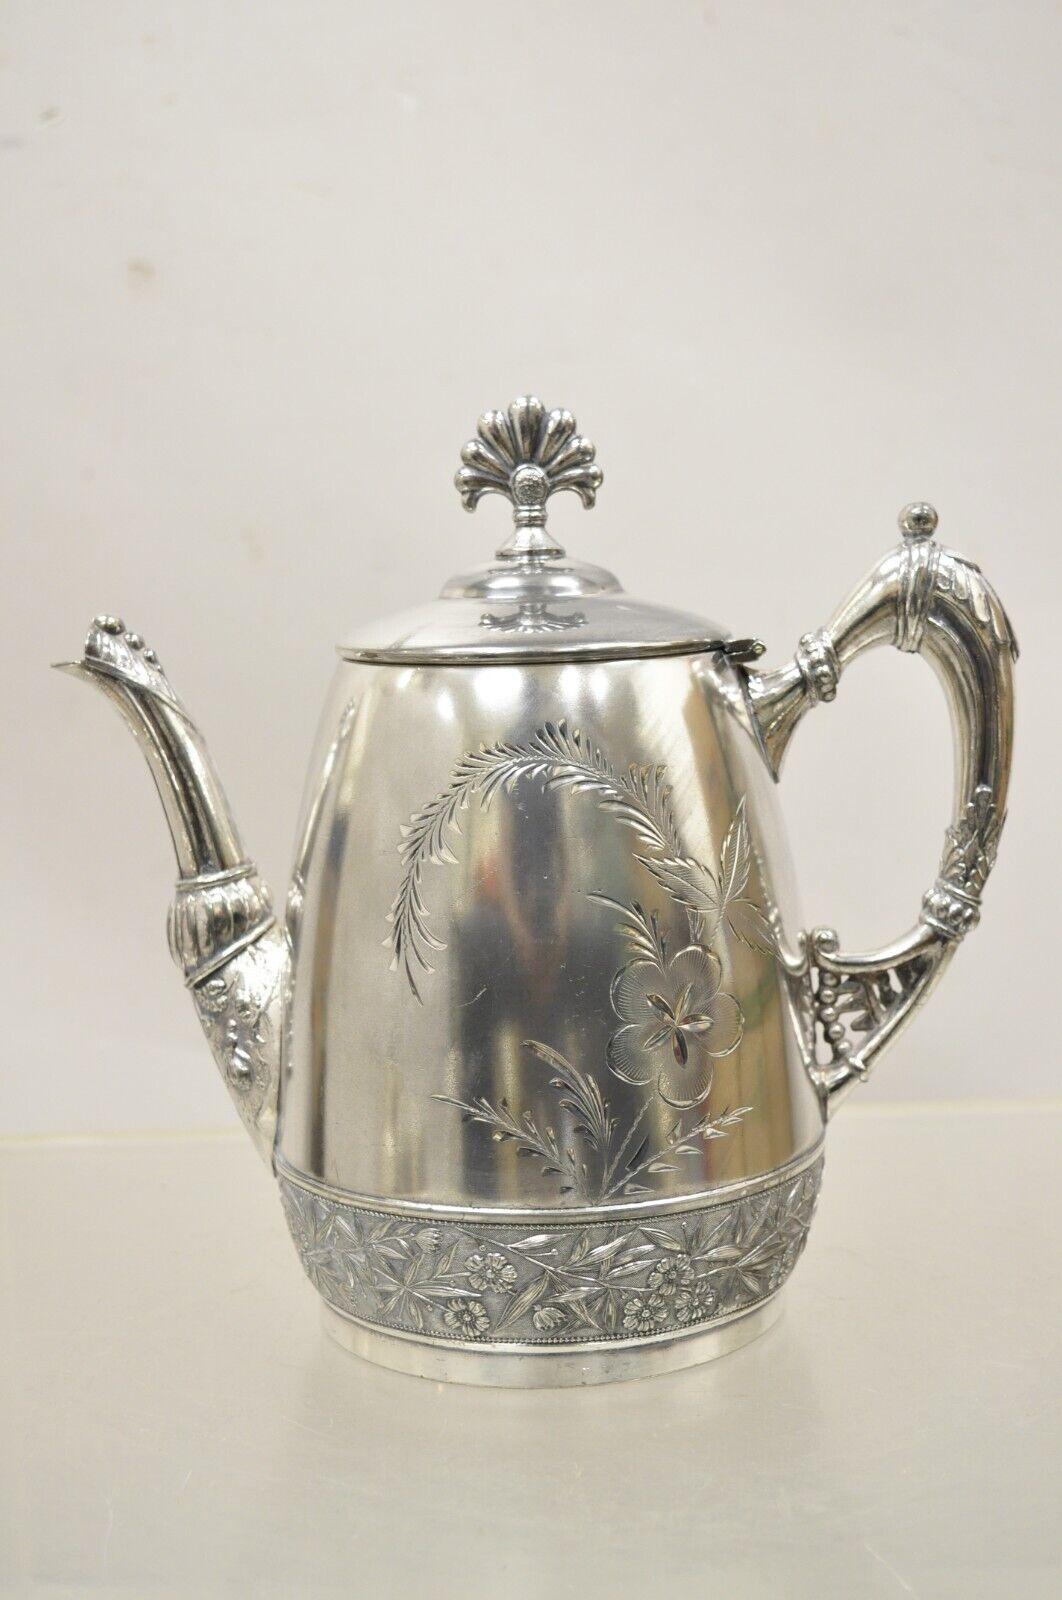 Antique Victorian Mead & Robbins Silver Plated Floral Repousse Teapot.  item features he original hallmark. Circa Early 1900s
Measurements: 9